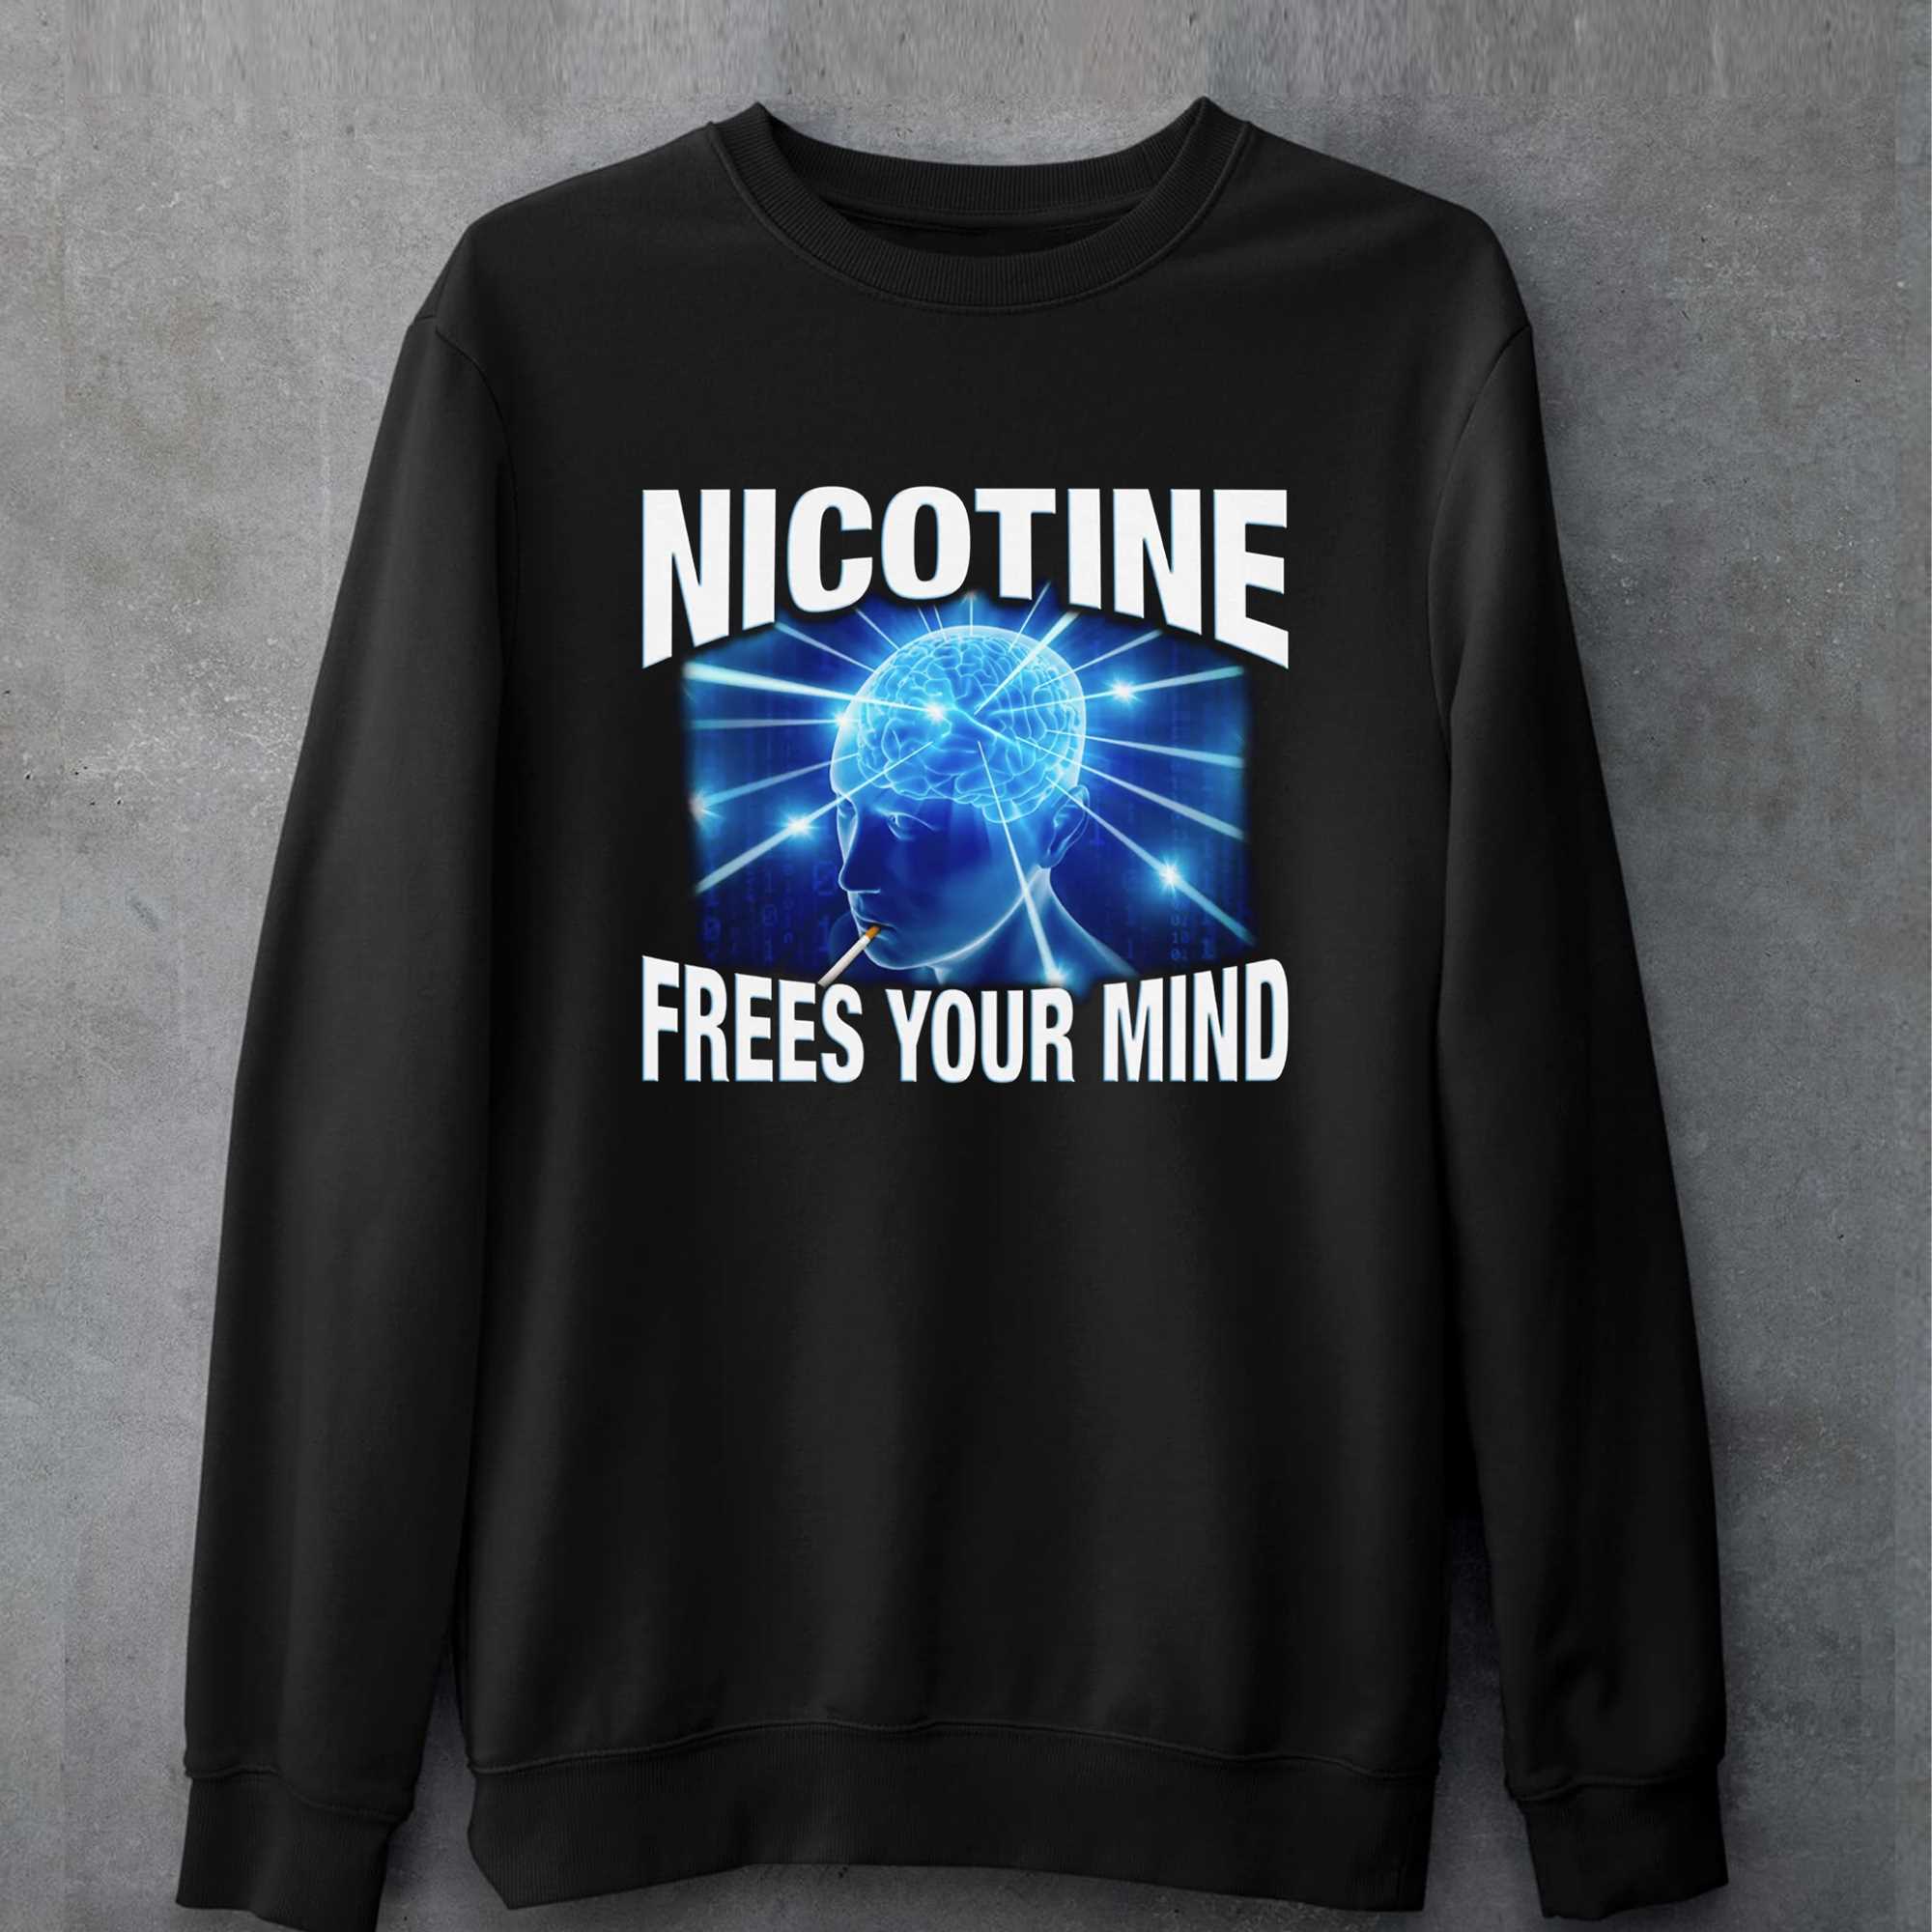 Nicotine Frees Your Mind T-shirt 